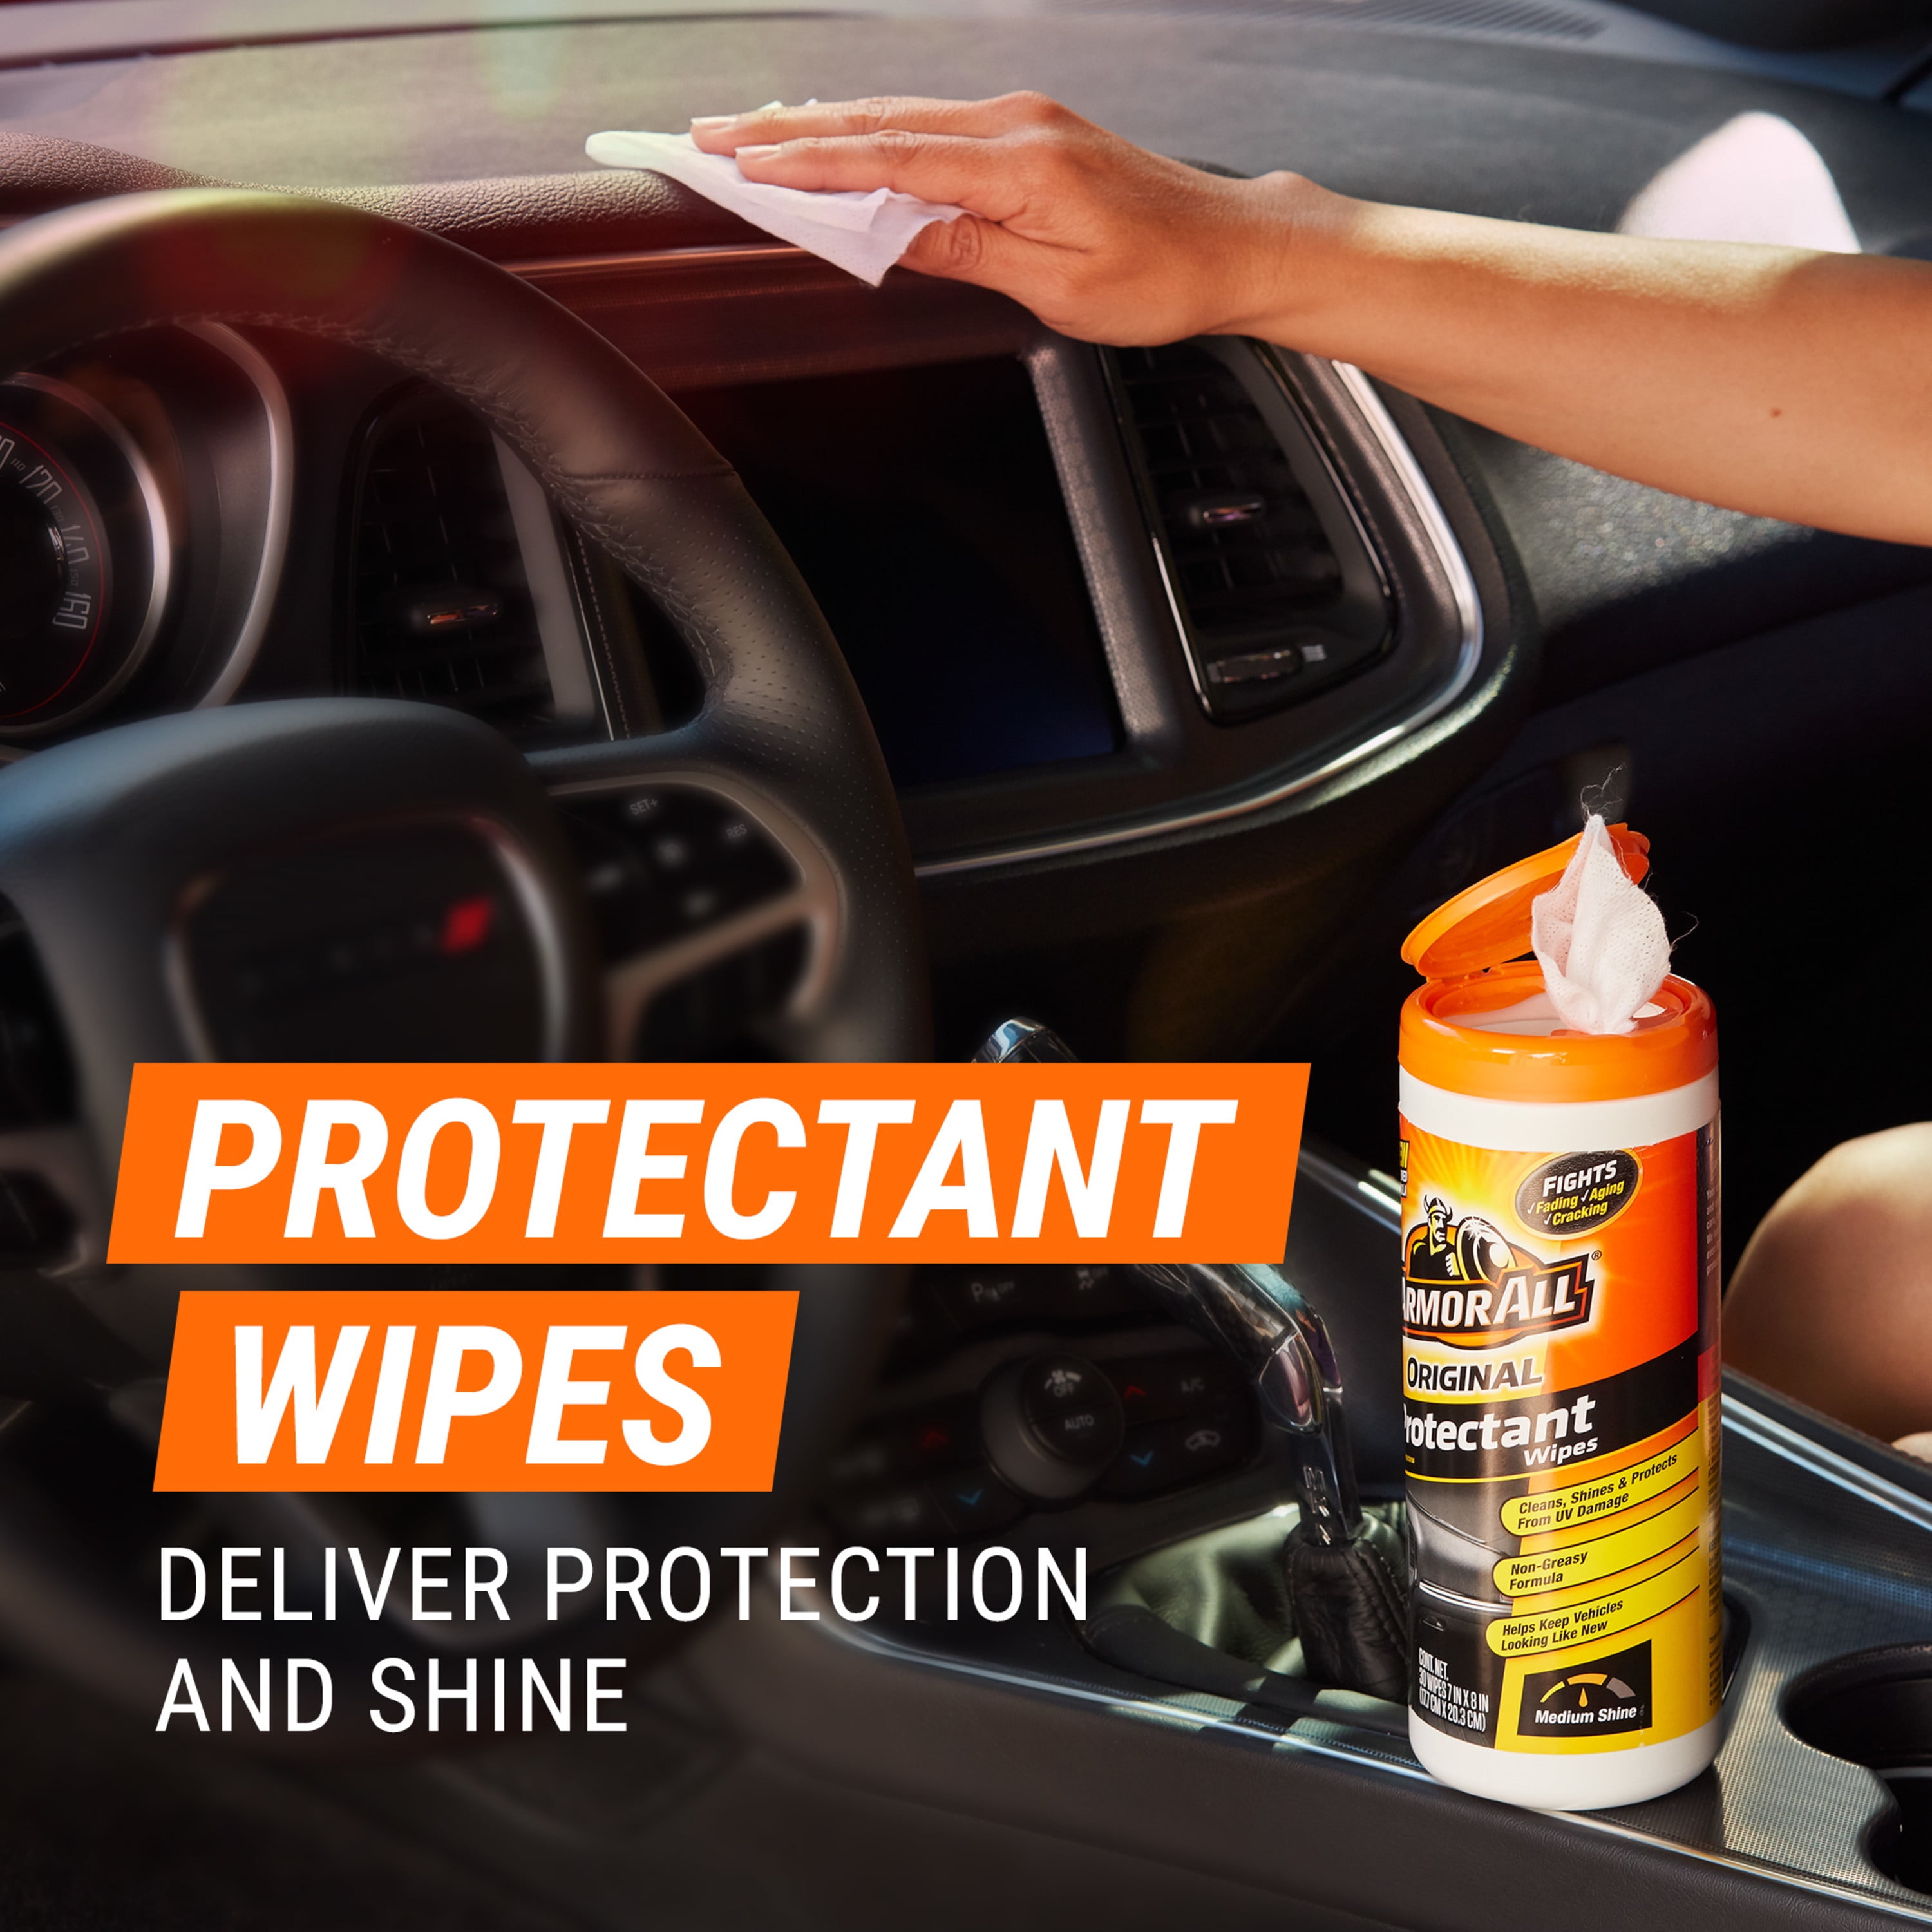 Armor All Original Protectant Wipes by Armor All, Car Interior Cleaner  Wipes with UV Protection to Fight Cracking & Fading, 30 Count